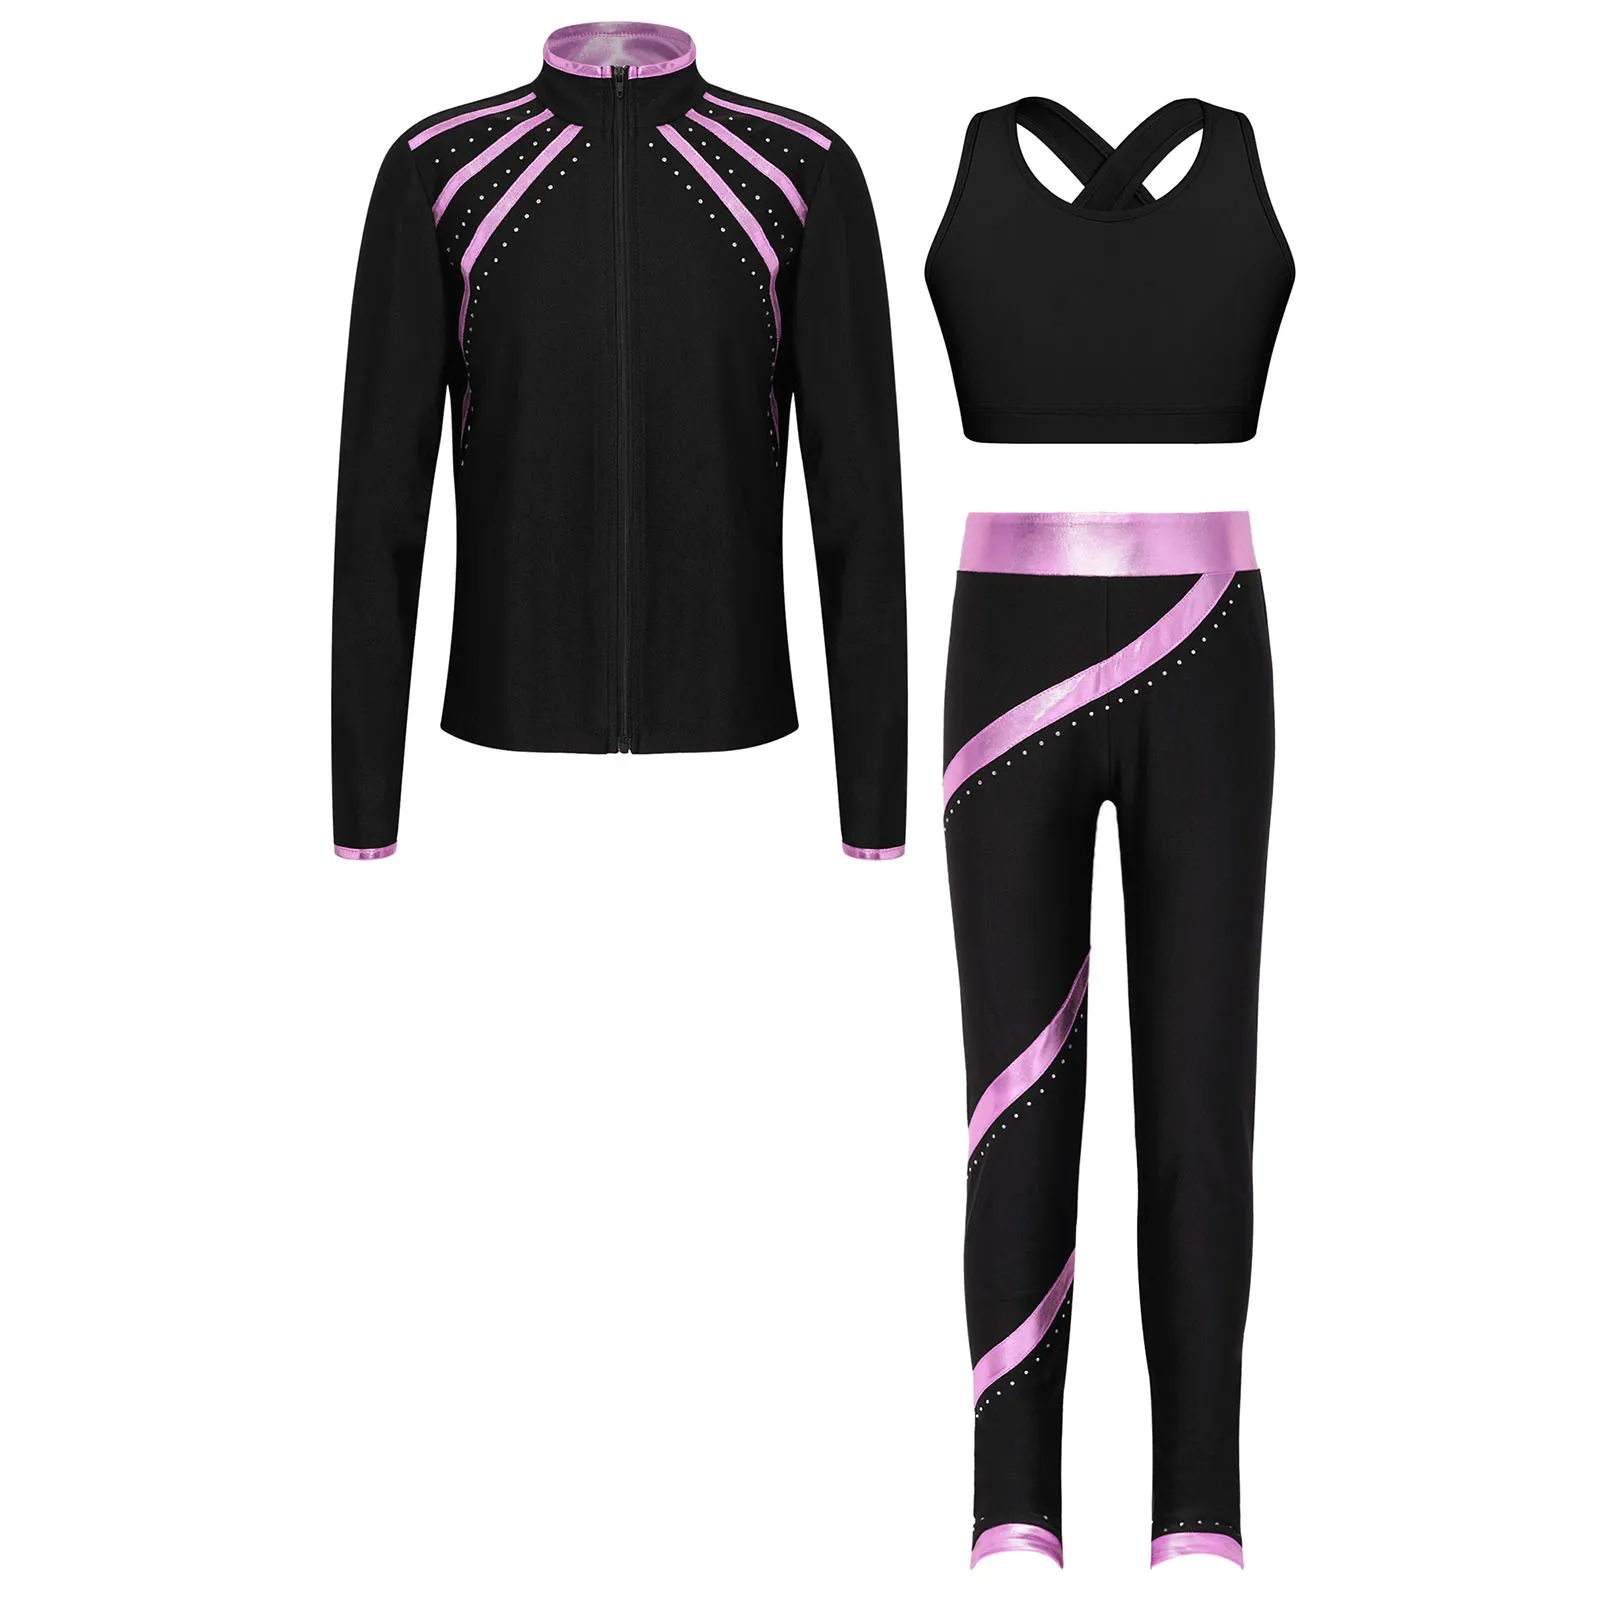 

Kids Girls Skating Gymnastics Costume Long Sleeve Zipper Outerwear with Crop Top Sport Leggings Pants Fitness Yoga Tracksuits